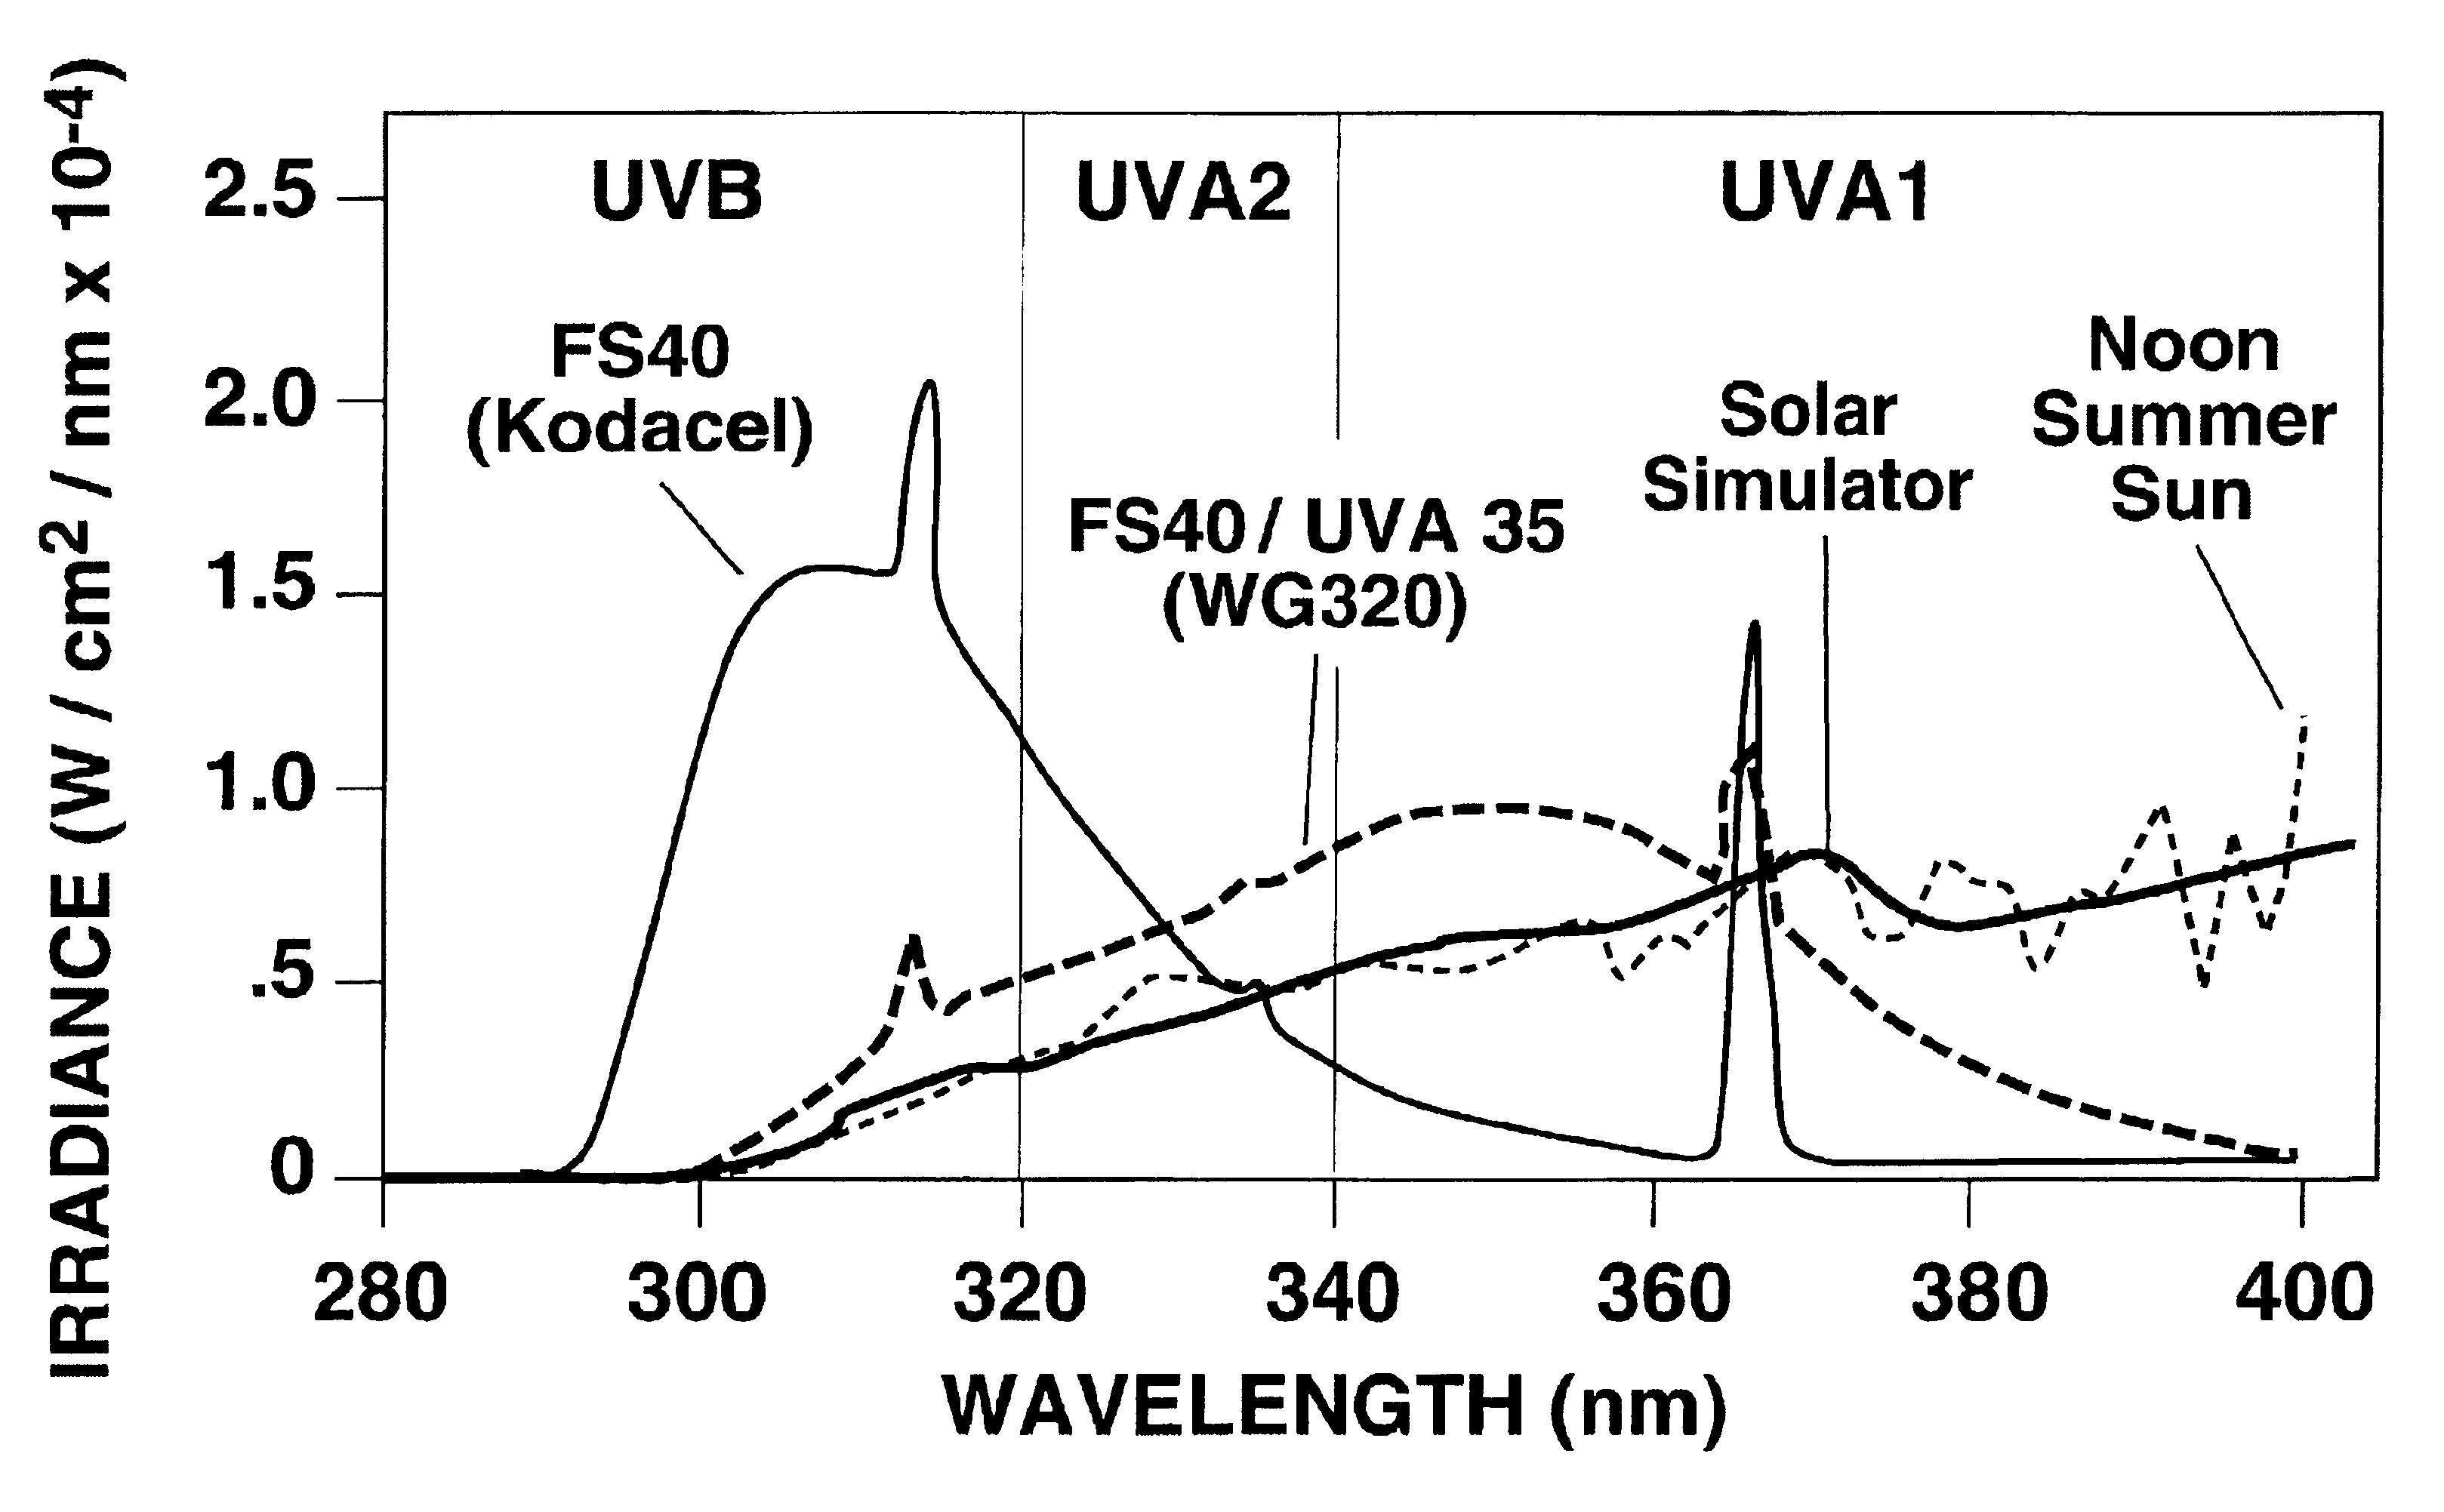 UVA (&gt; 360-400) and UVB (300-325) specific sunscreens